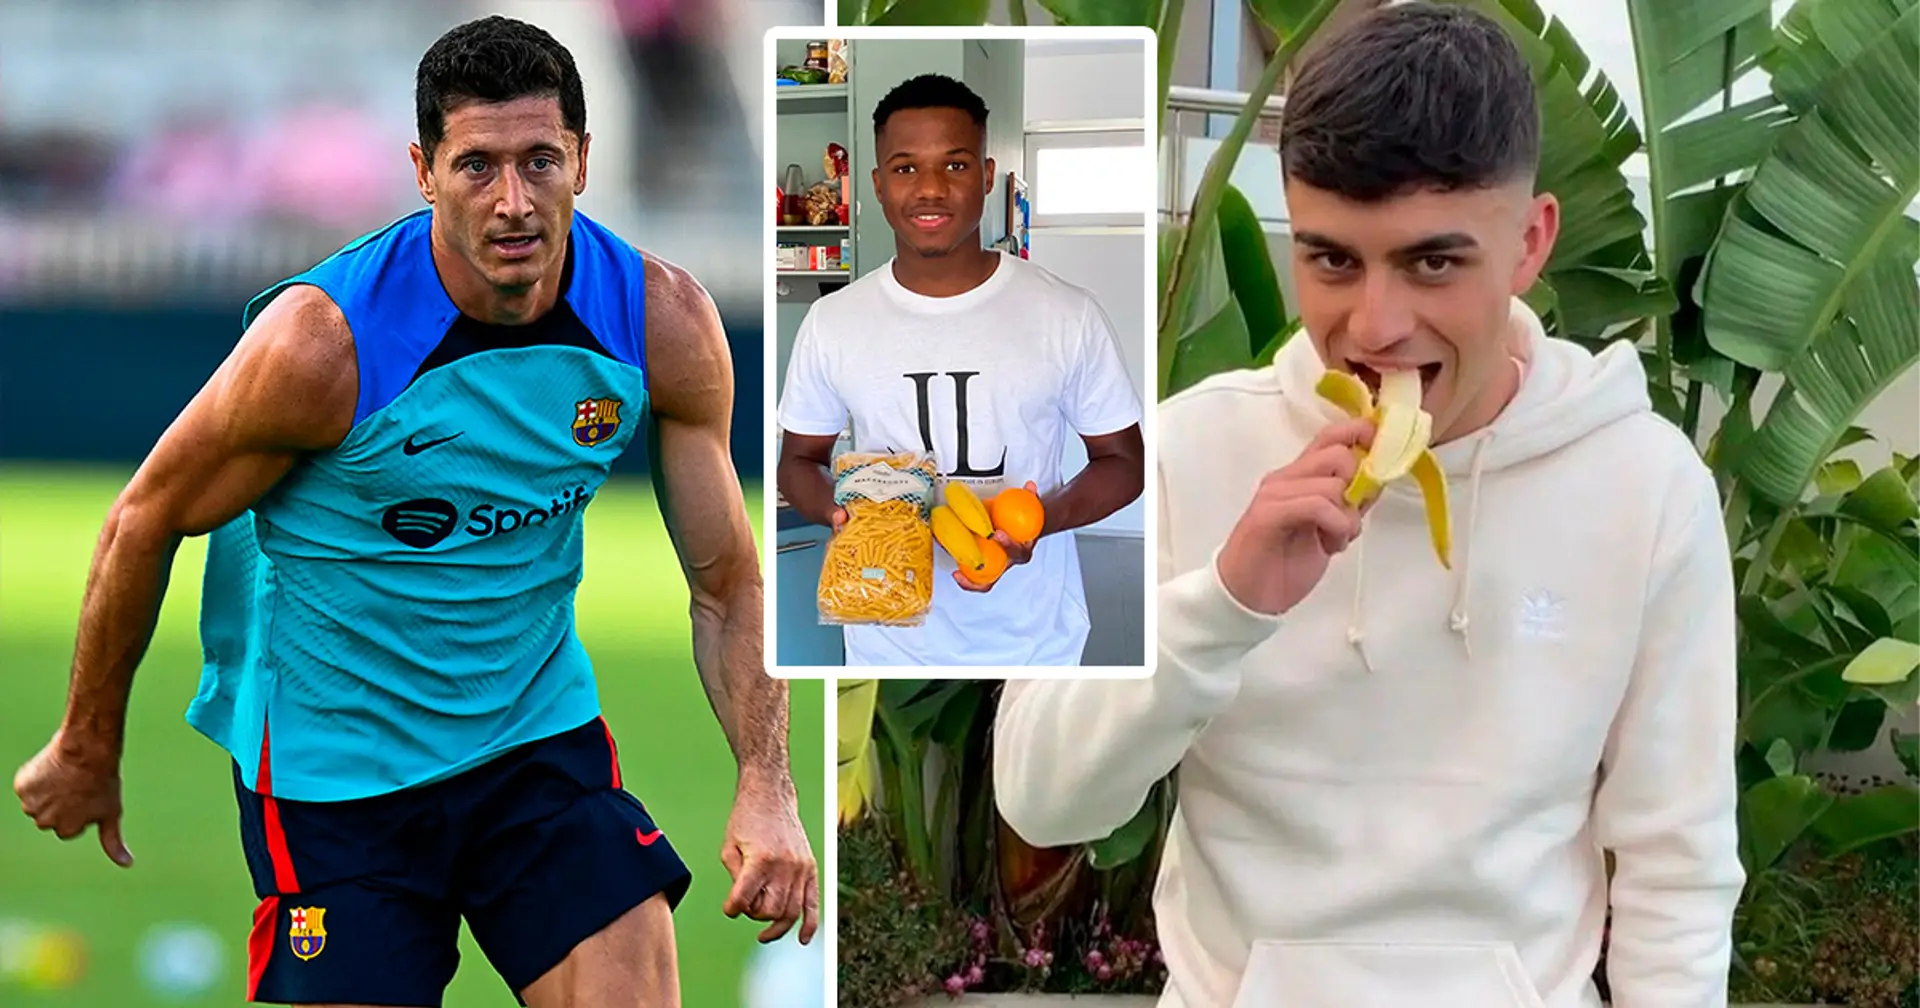 'Snack smartly': your essential guide on a proper diet to become a top Barcelona player